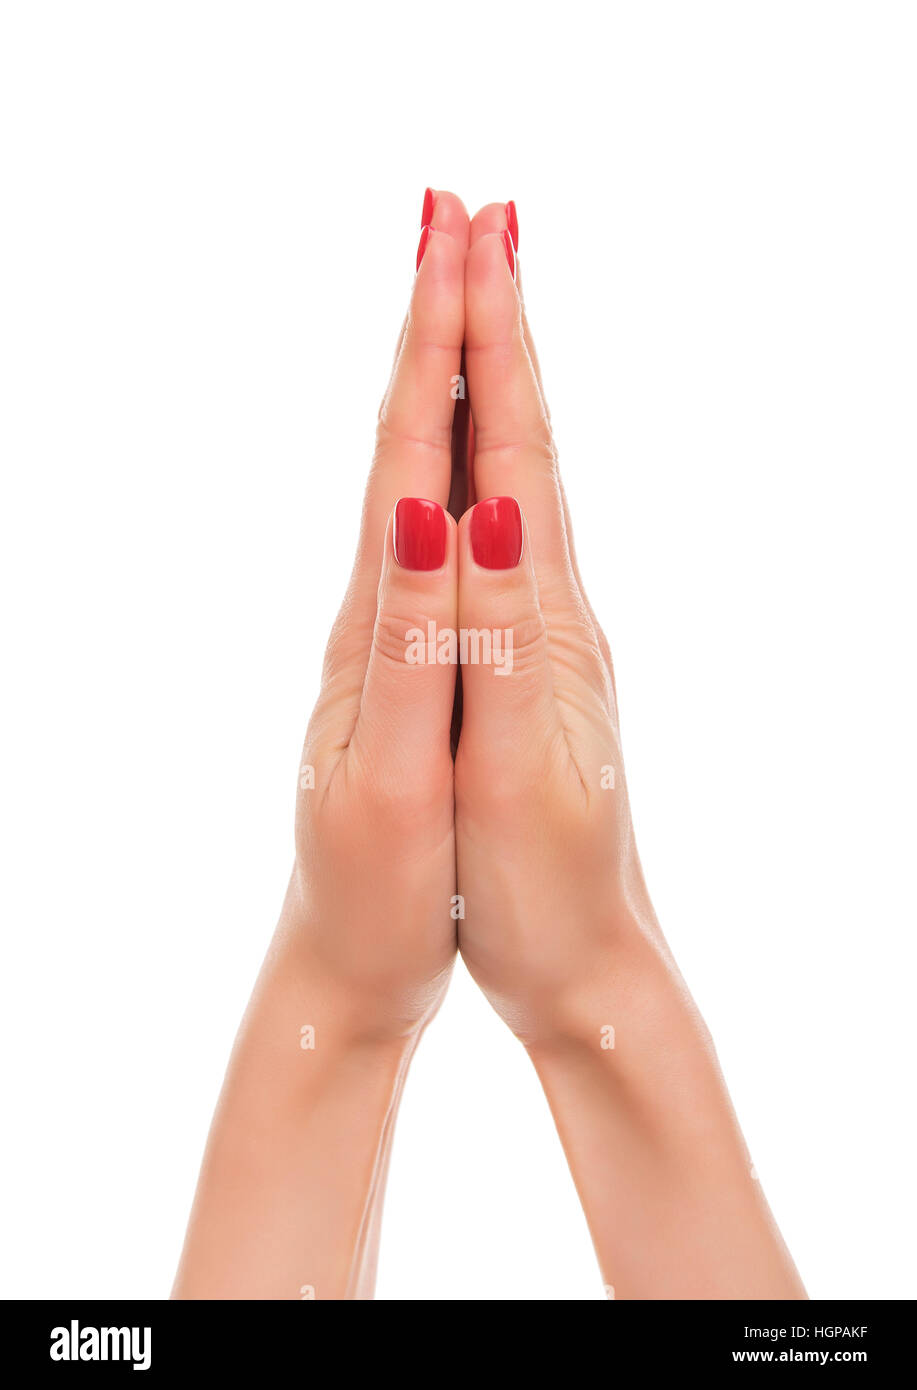 Praying hands of a woman. Stock Photo